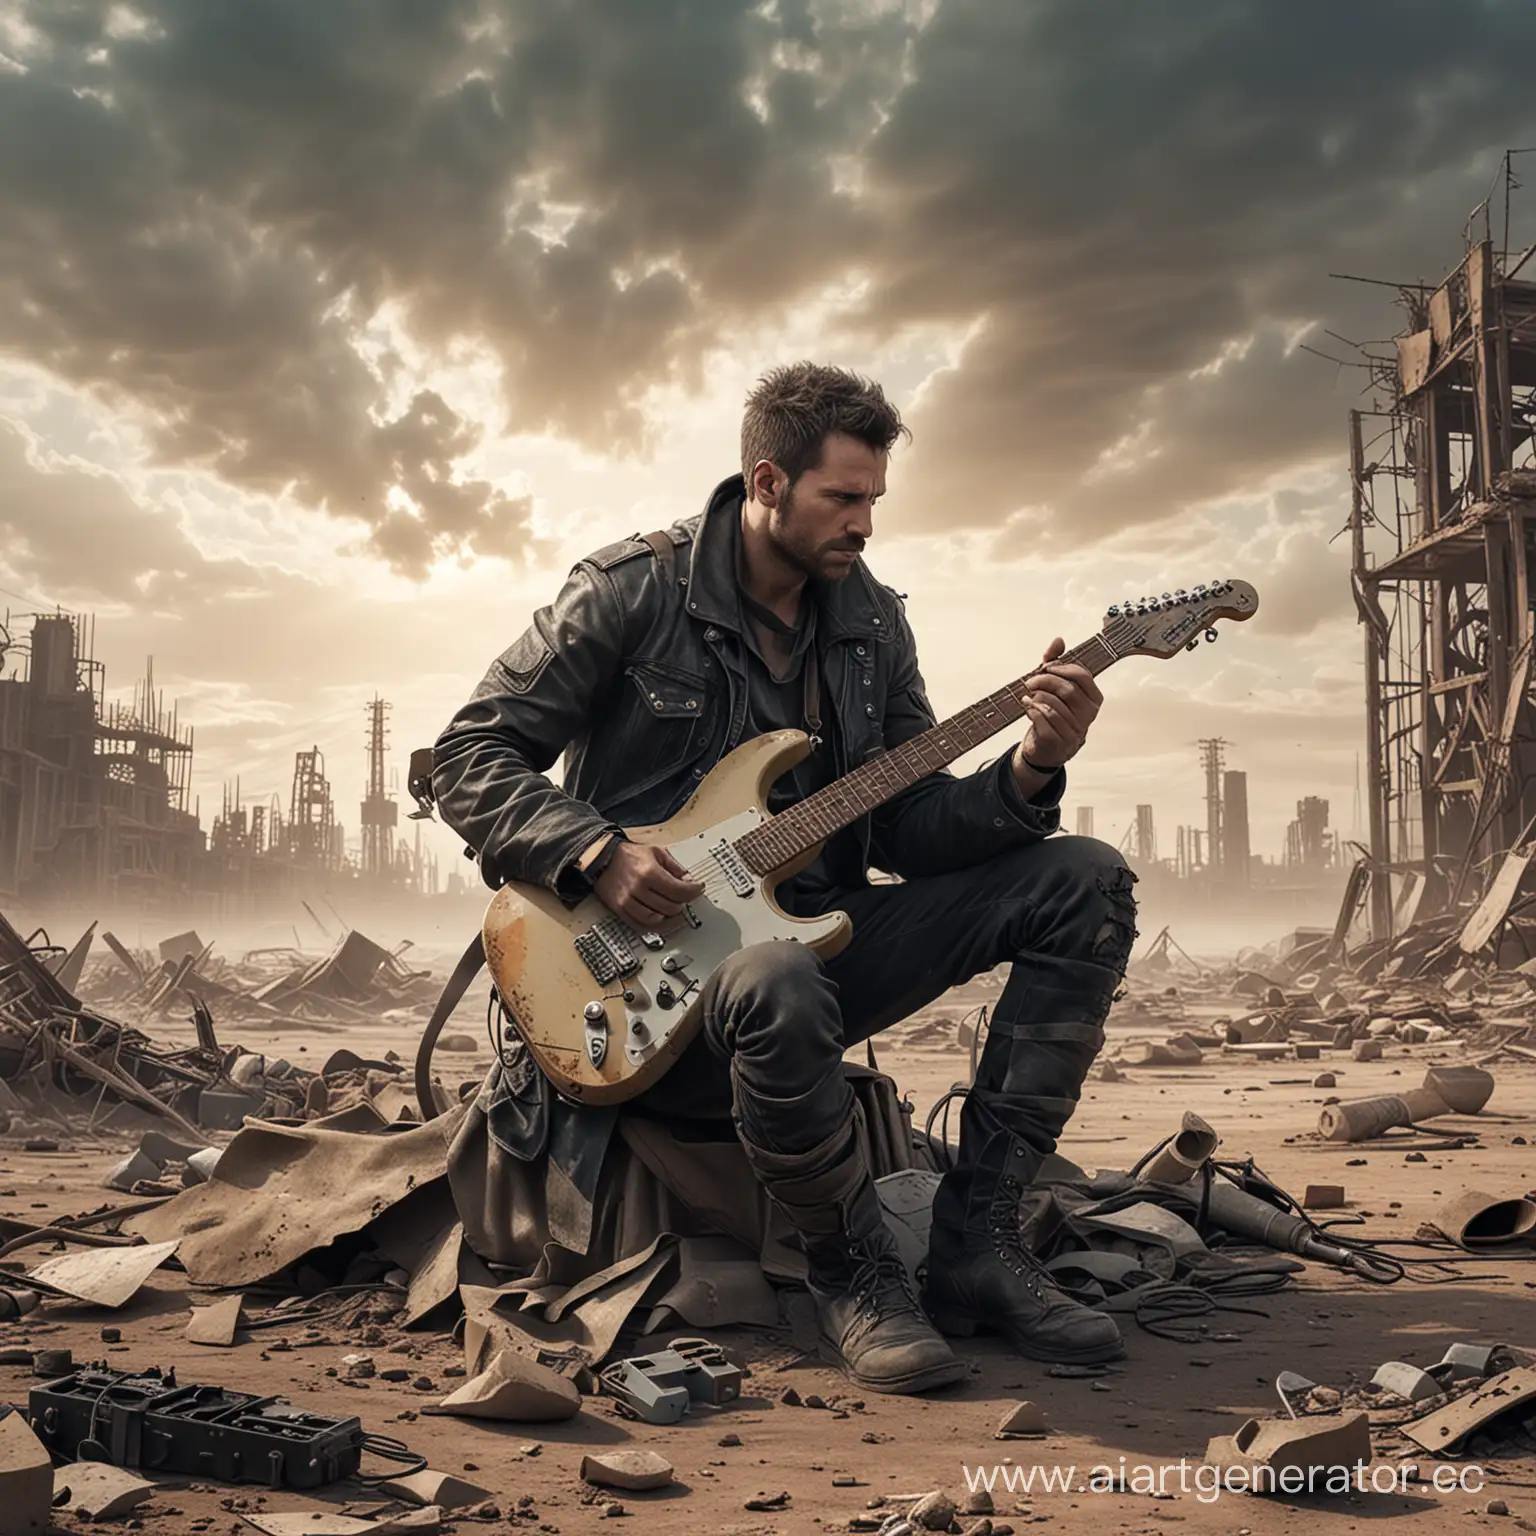 Solo-Musician-Amidst-PostApocalyptic-Ruins-Strumming-Electric-Guitar